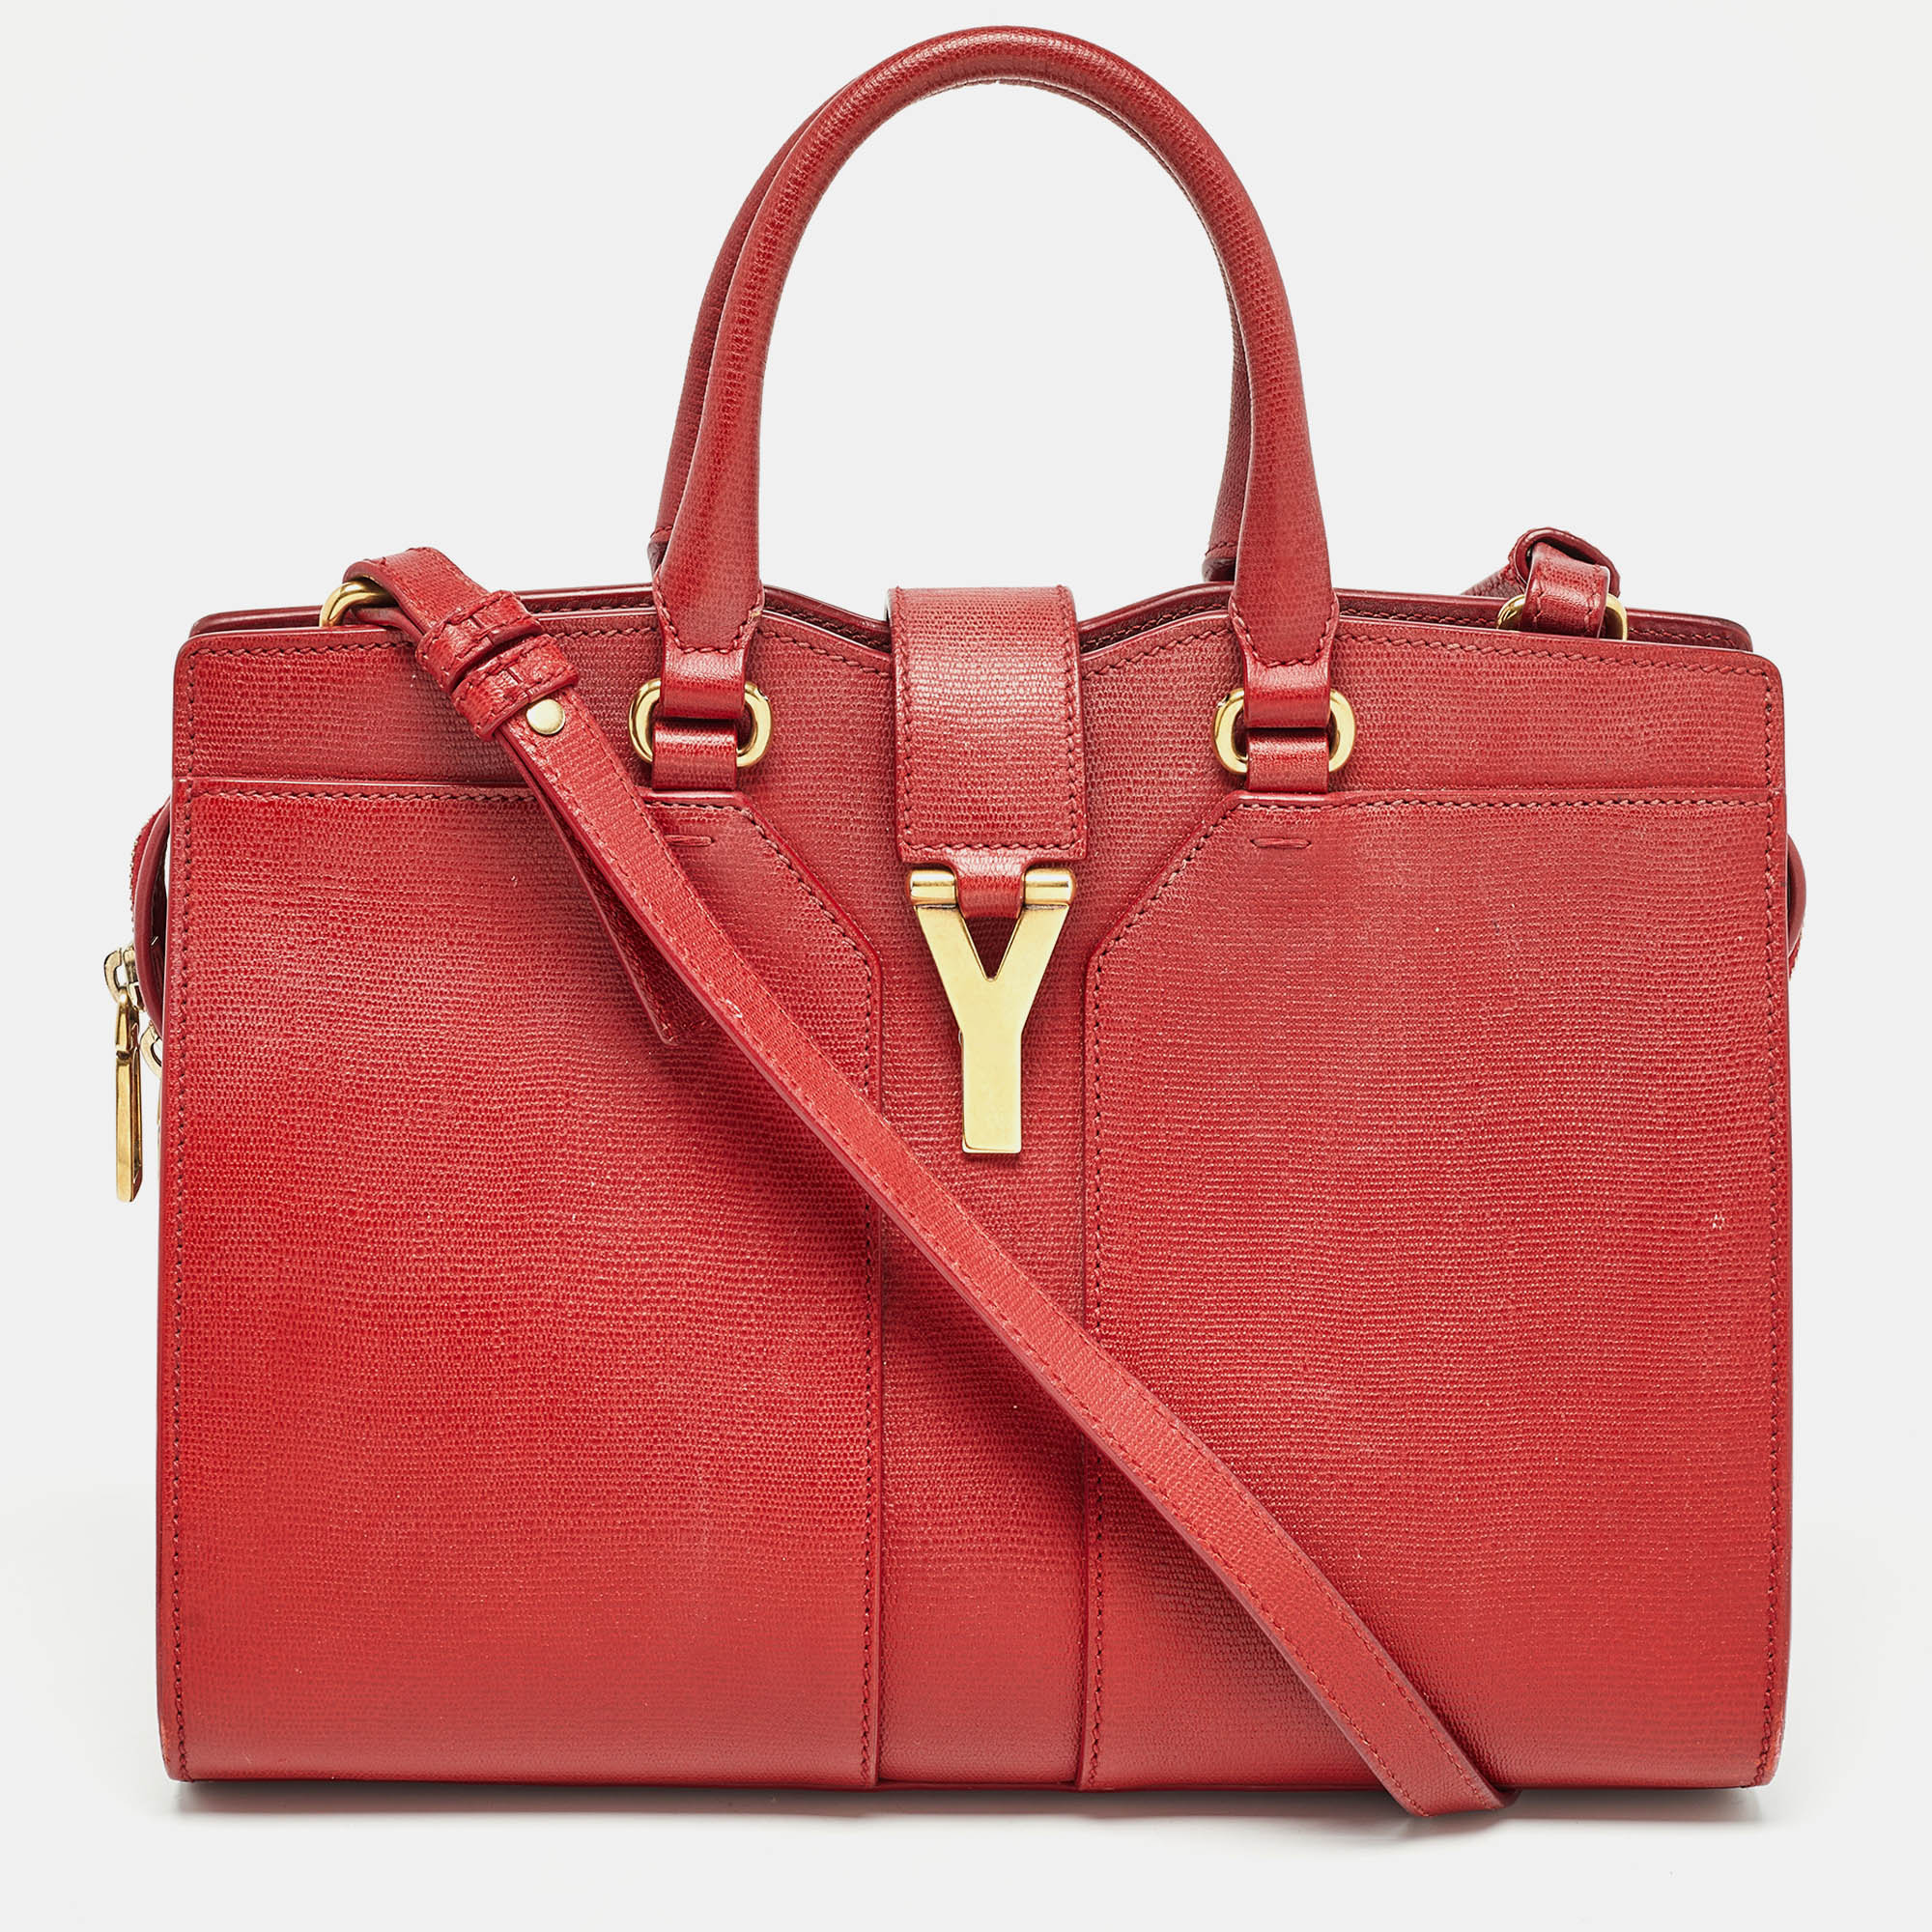 

Yves Saint Laurent Red Leather  Cabas Chyc Tote